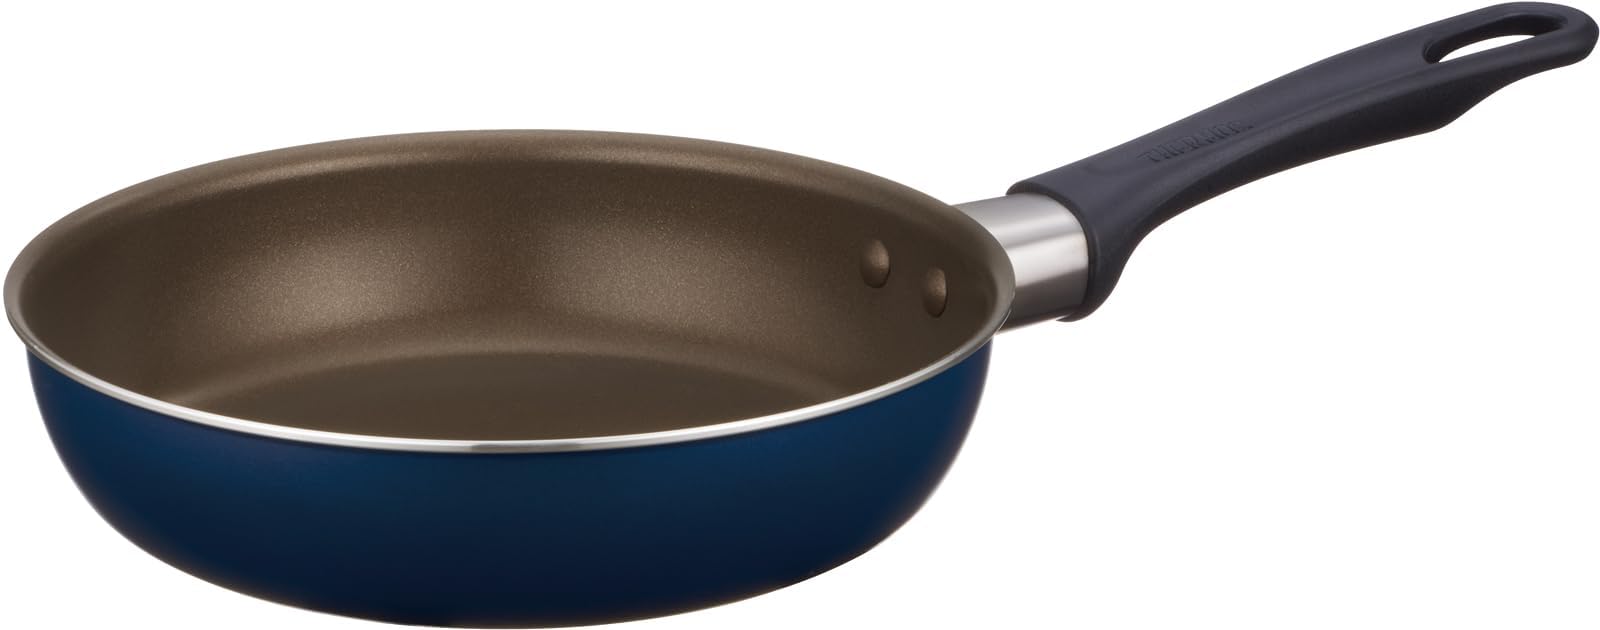 Thermos 20cm Durable Series Navy Frying Pan for Gas Fire - KFI-020